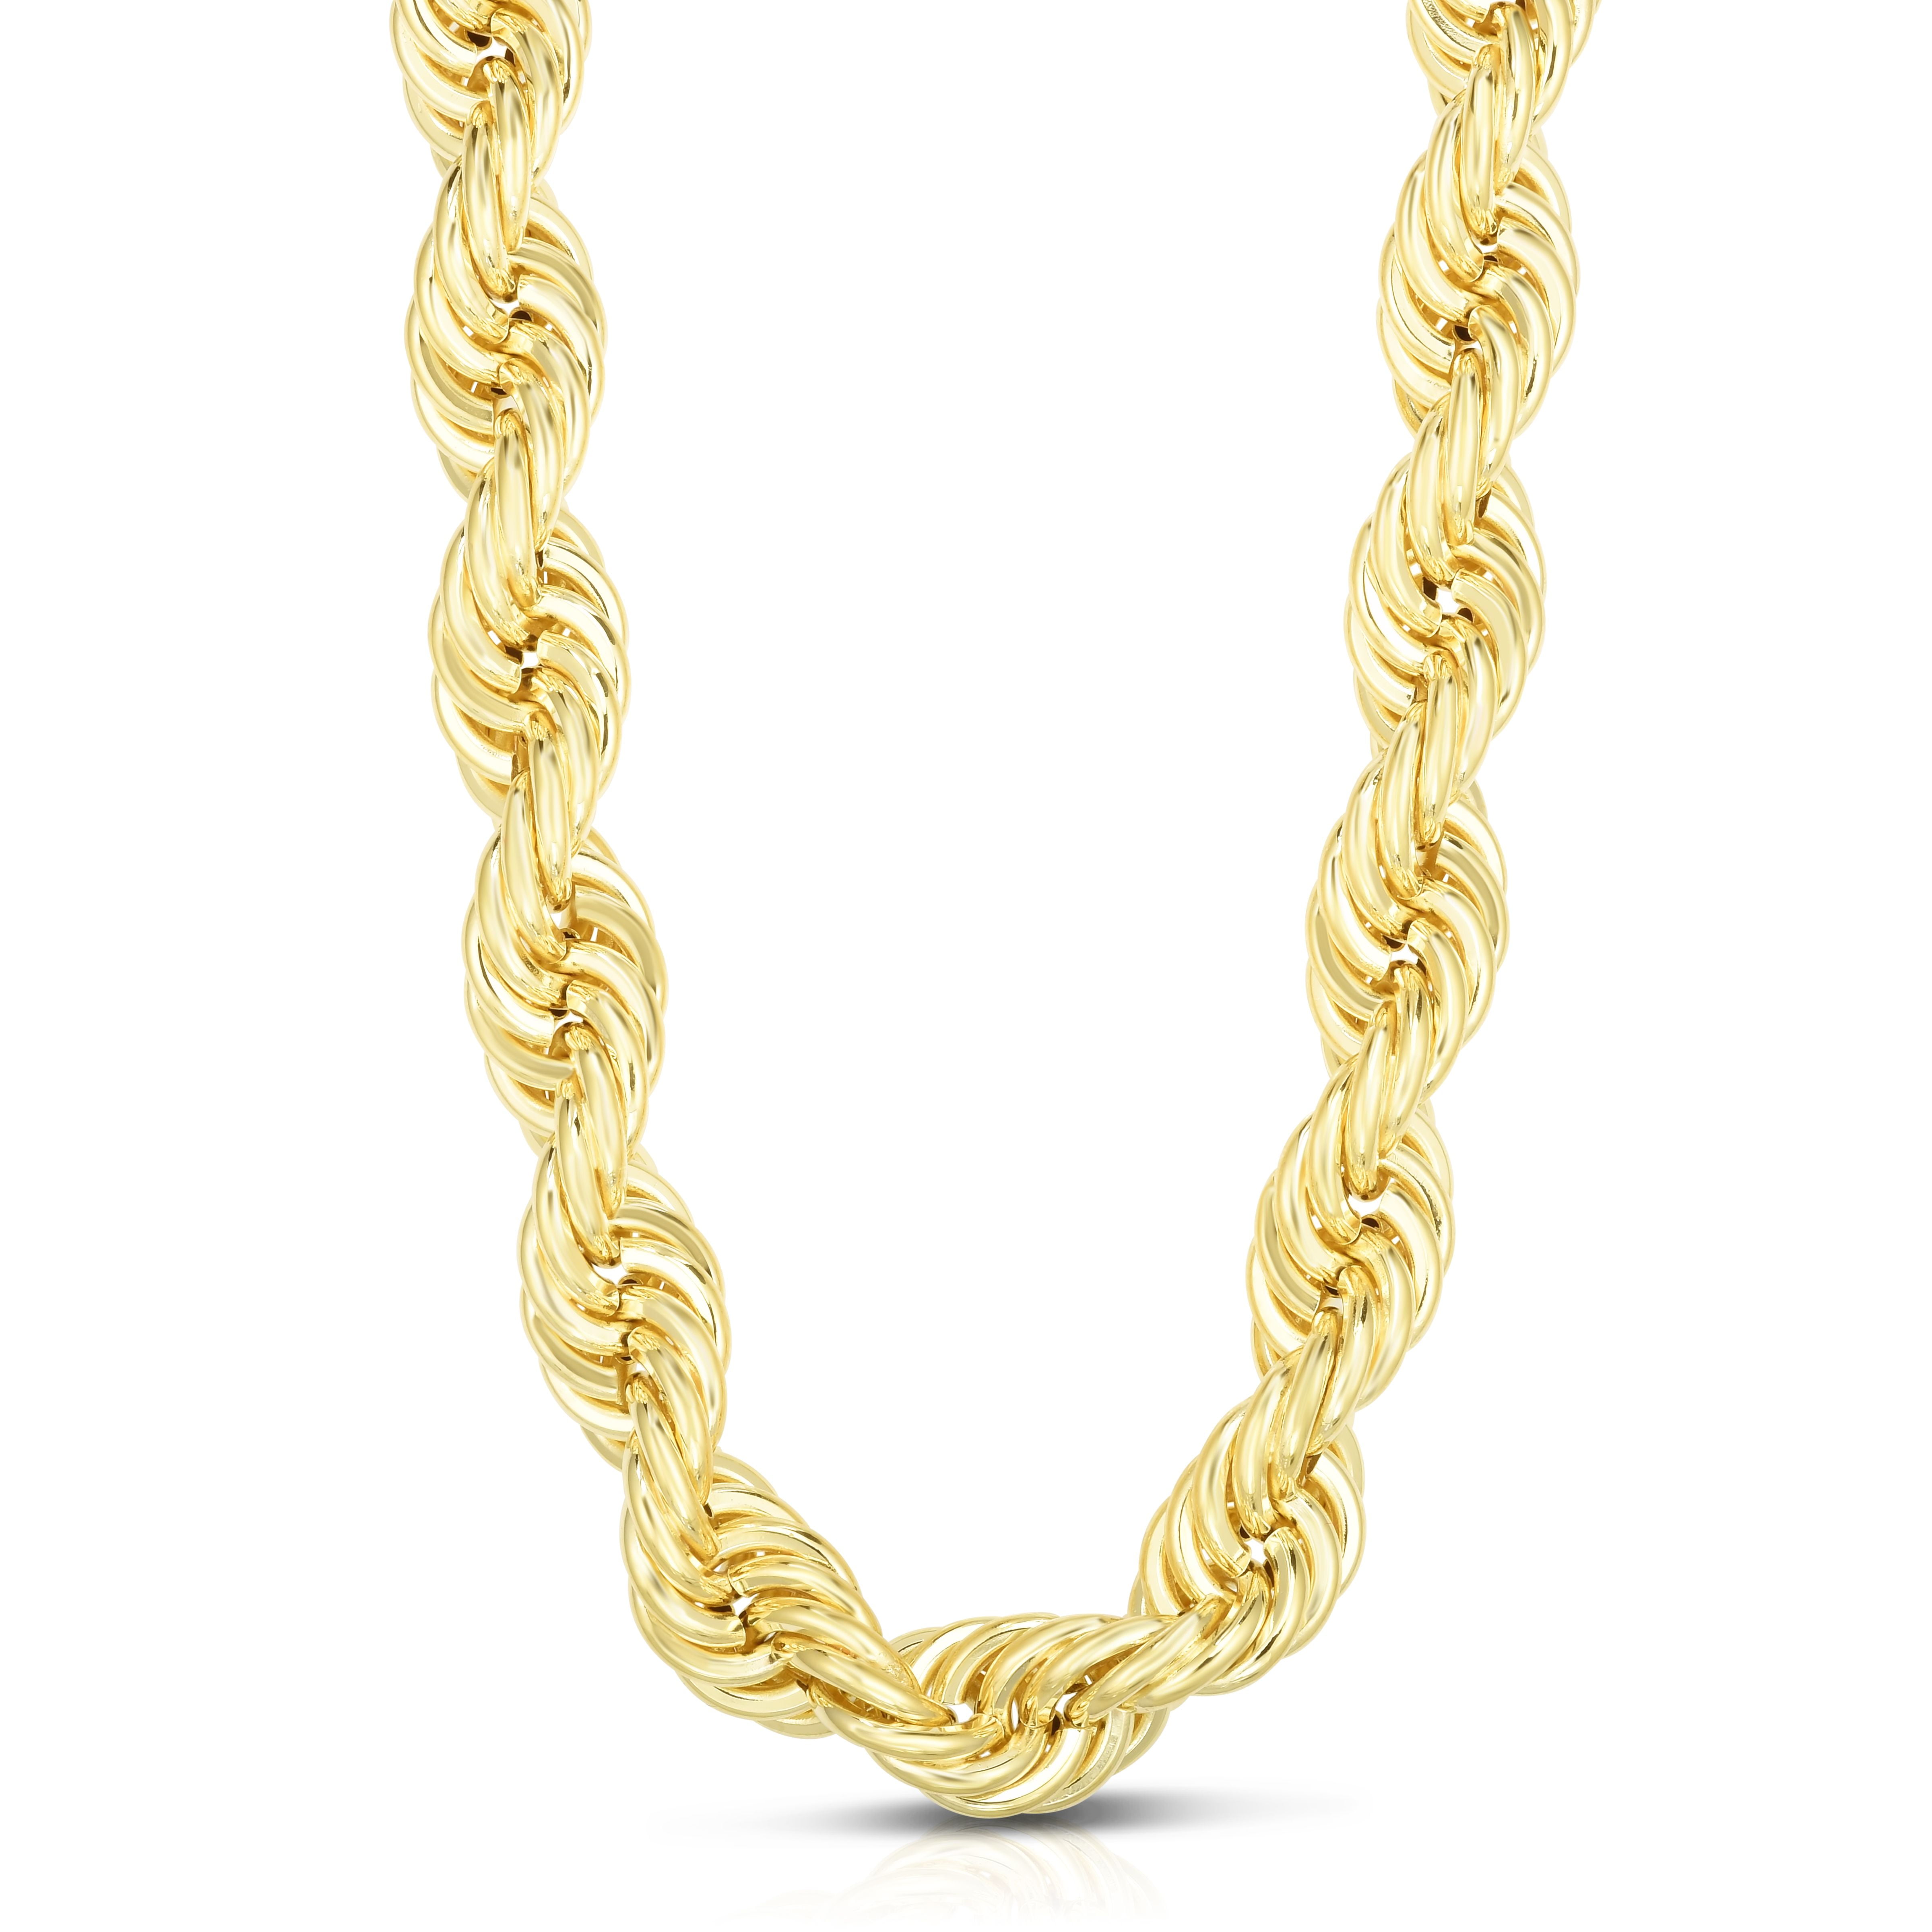 Jewelry Affairs - 14k Yellow Solid Gold Rope Chain Necklace, 12mm, 26